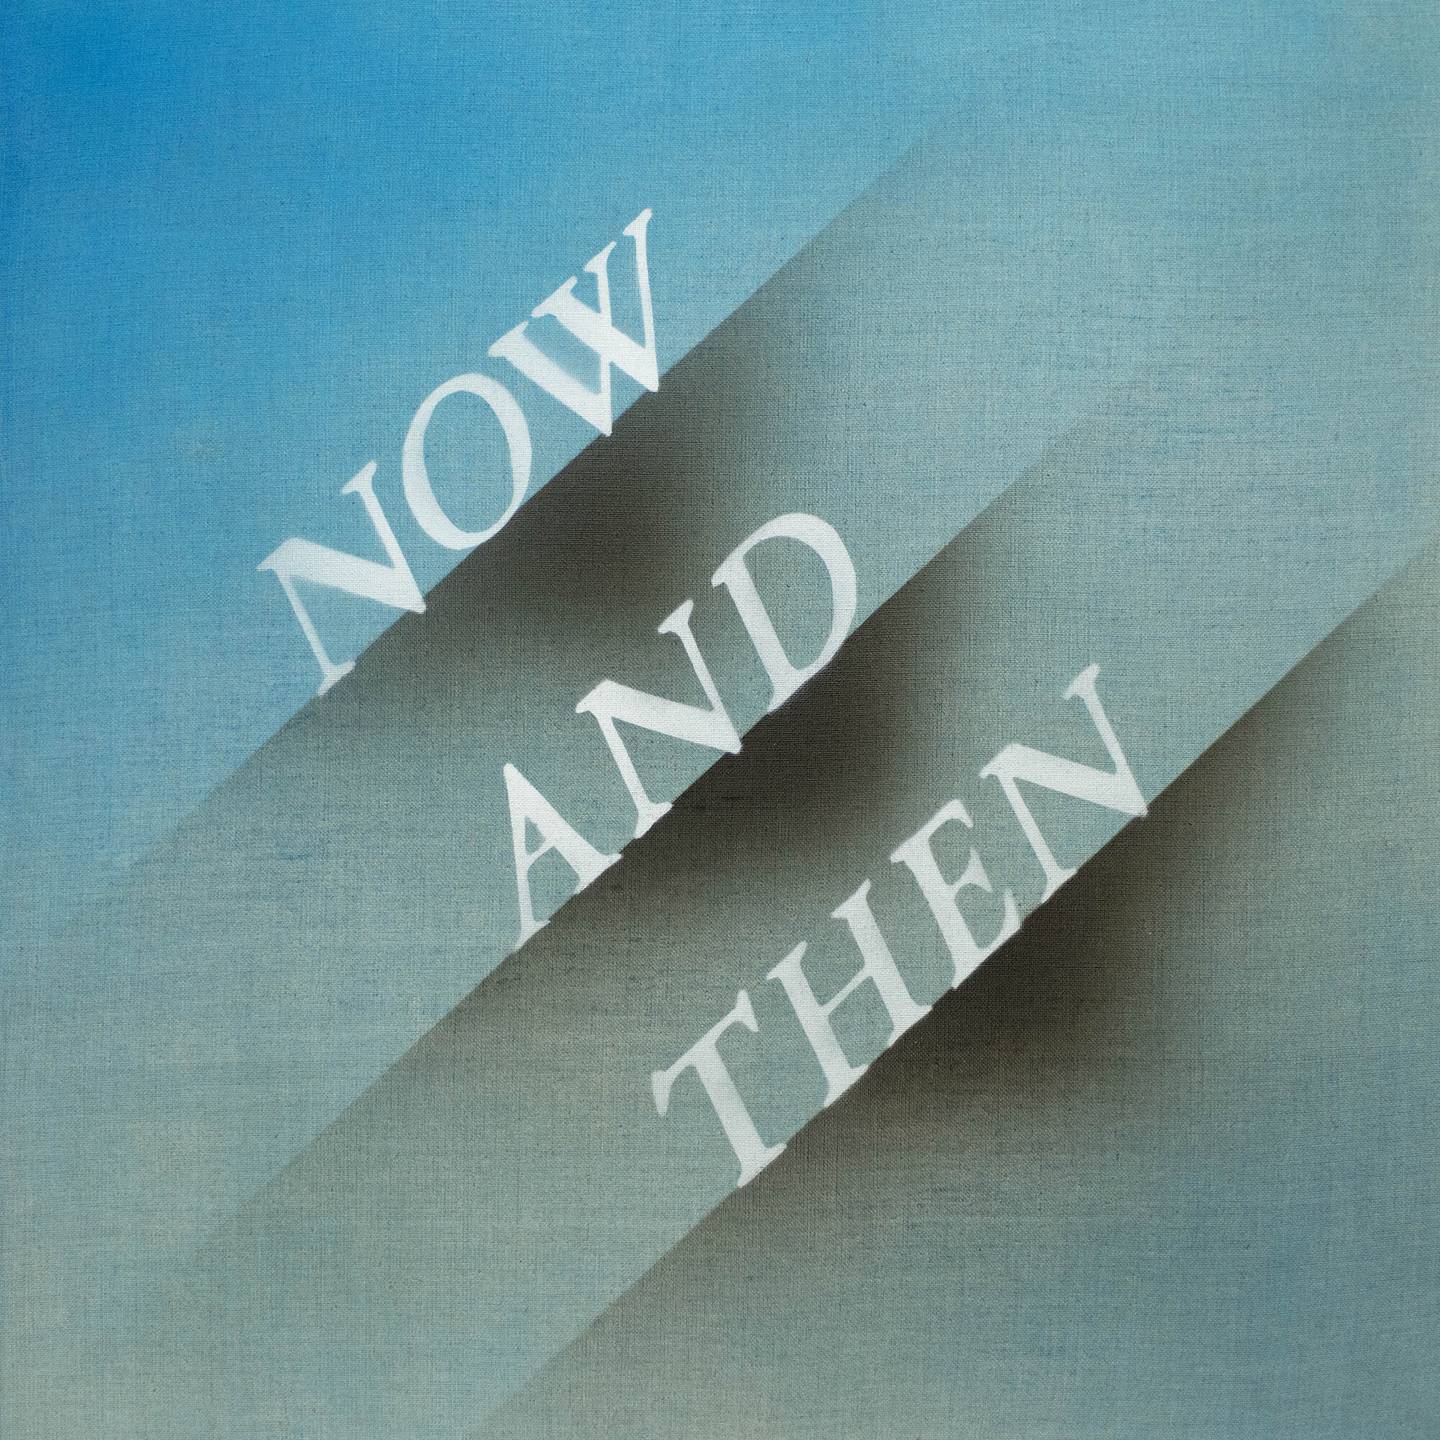 The Beatles: Now And Then (singel)